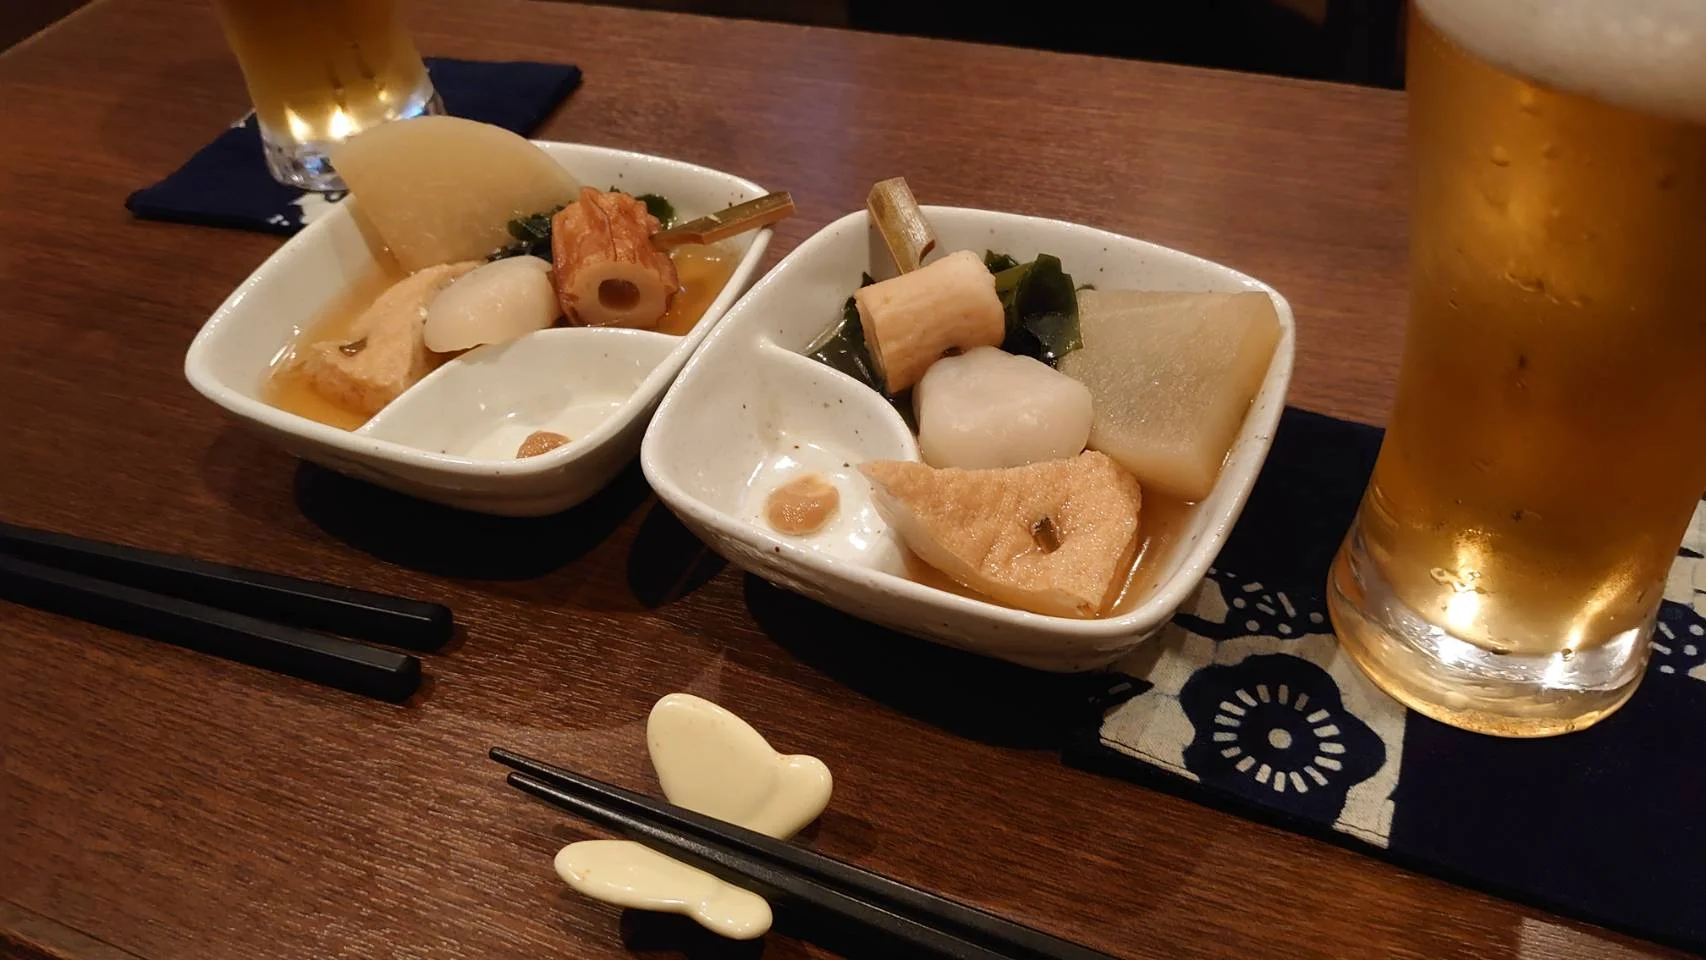 Enjoy Japanese Night Culture at a “Snack” in Shinbashi!